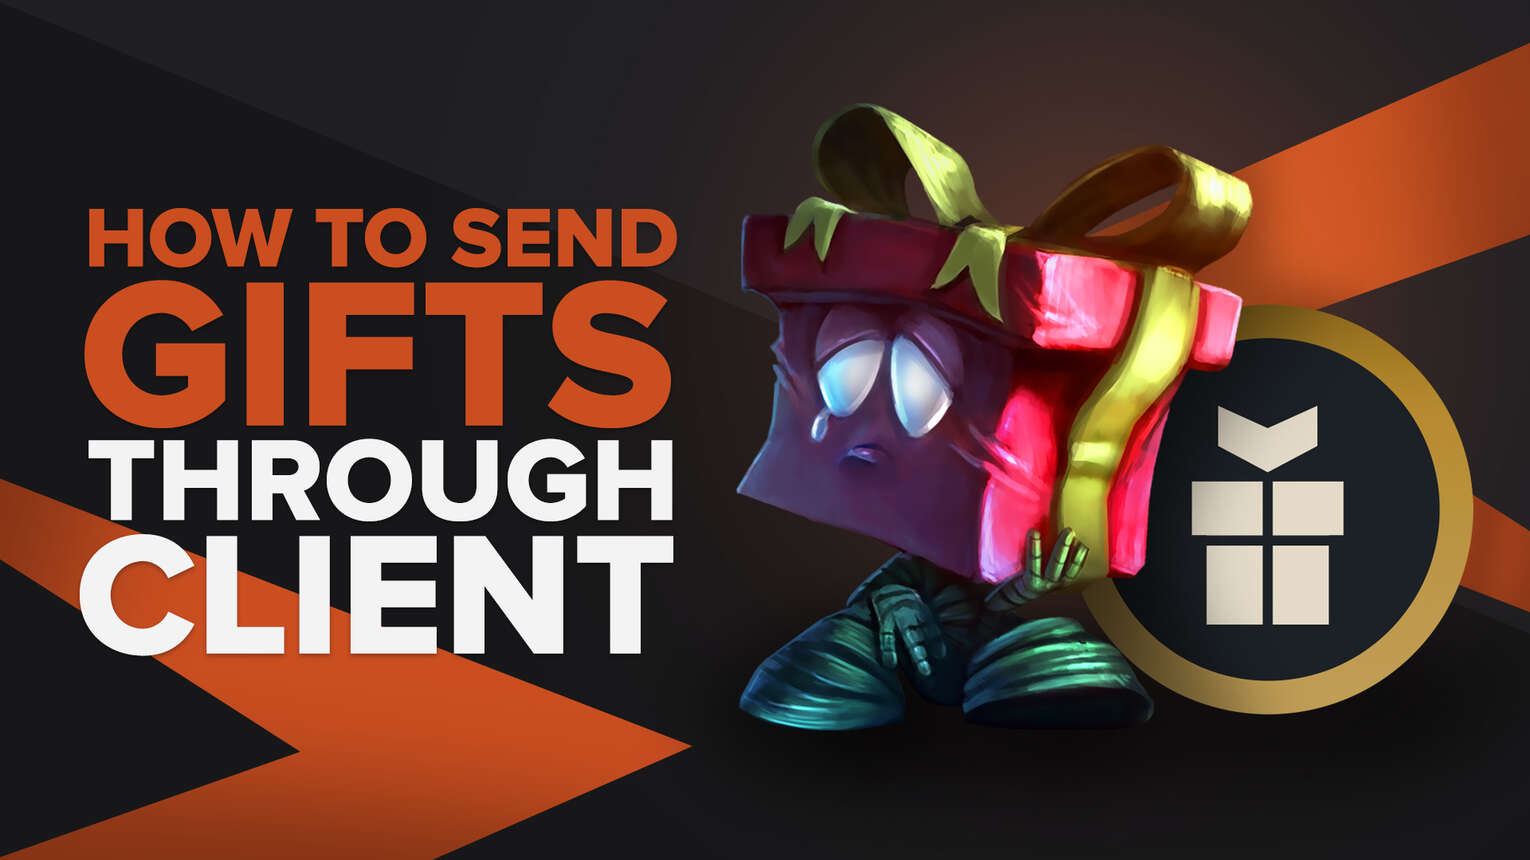 How to send gifts through your league of legends client